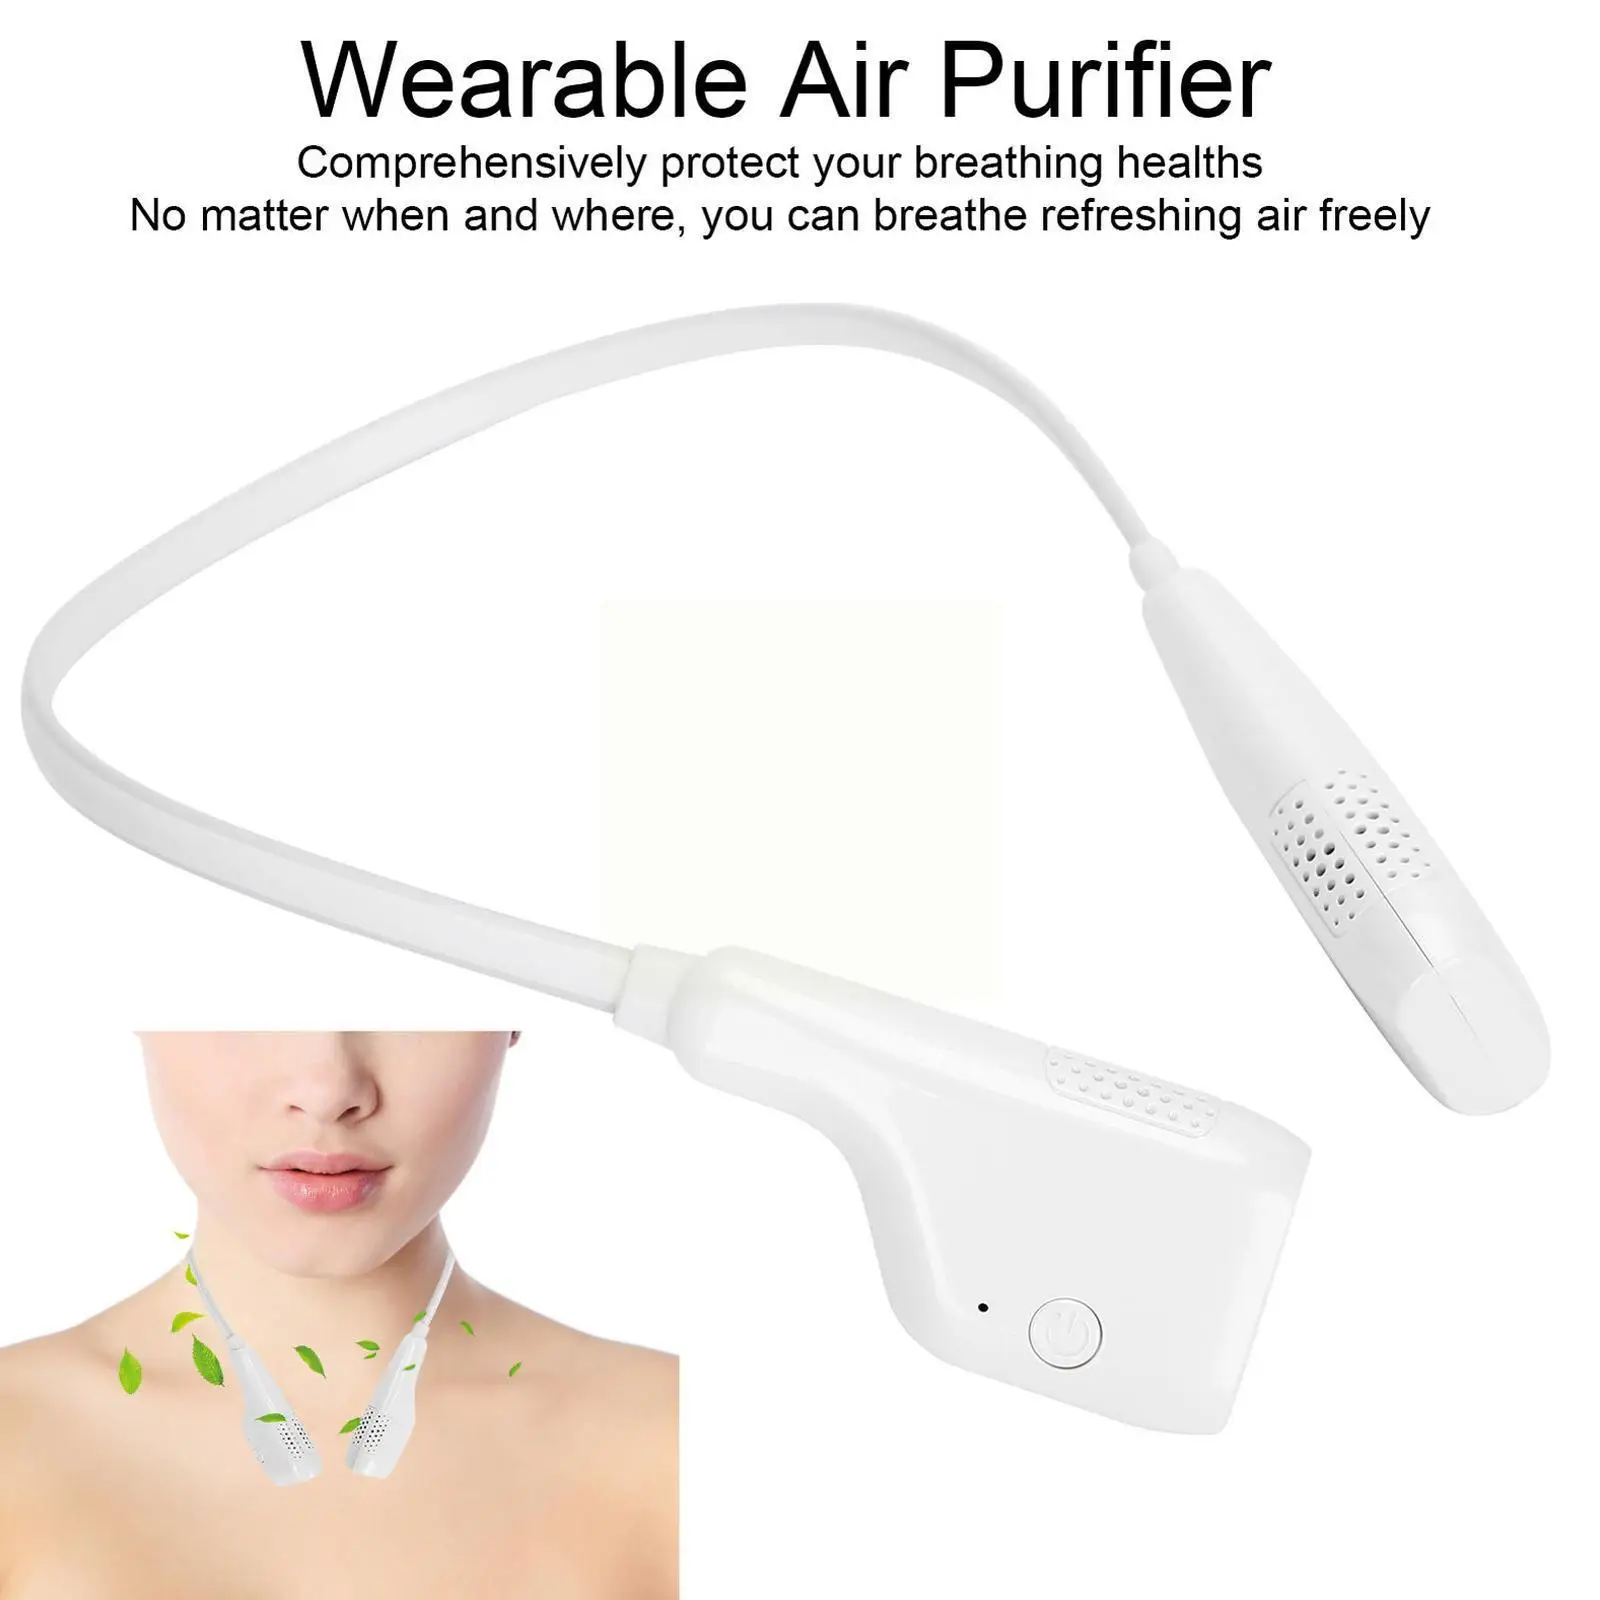 

New Hanging Air Purifier Negative Ion Purifier Portable Portable Deodorant Purifier Silent Small E4i5